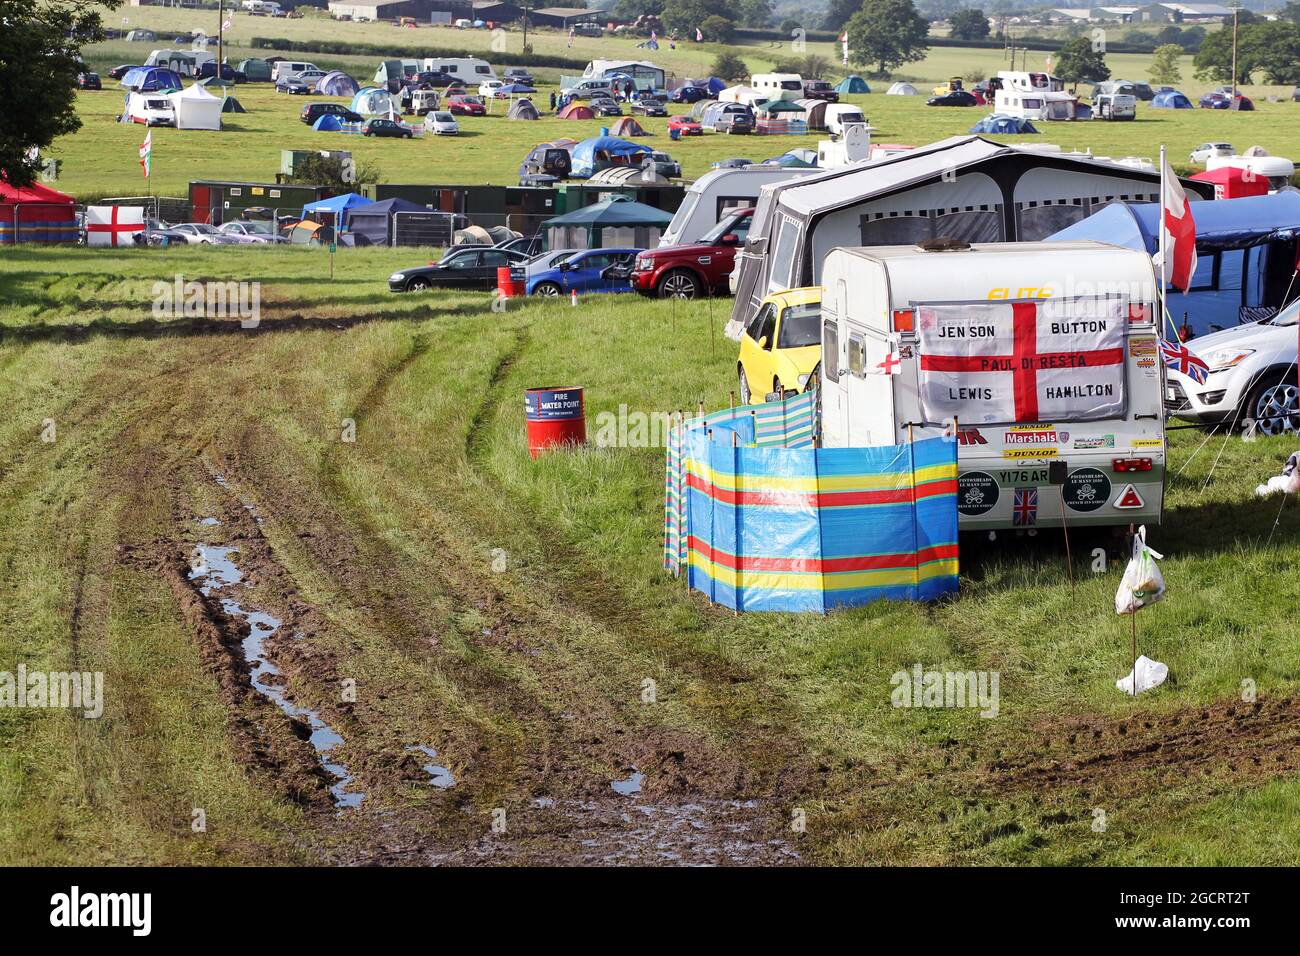 Wet and muddy car parks and camp sites at the circuit. British Grand Prix, Friday 6th July 2012. Silverstone, England. Stock Photo